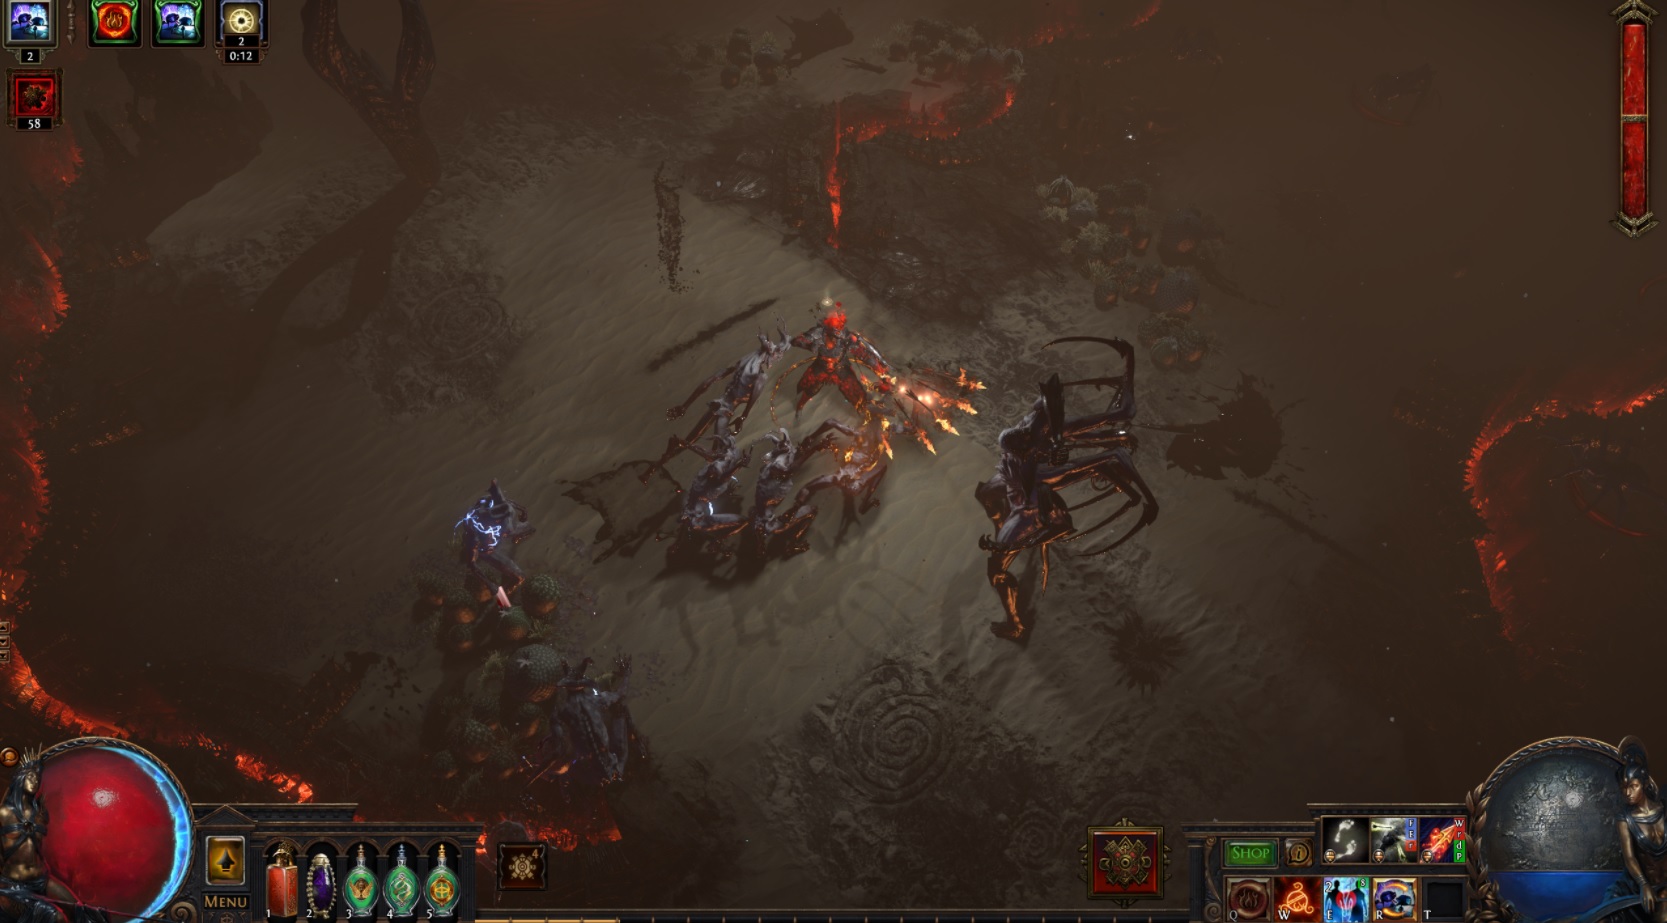 Check out an image directly from Path of Exile Scourge!